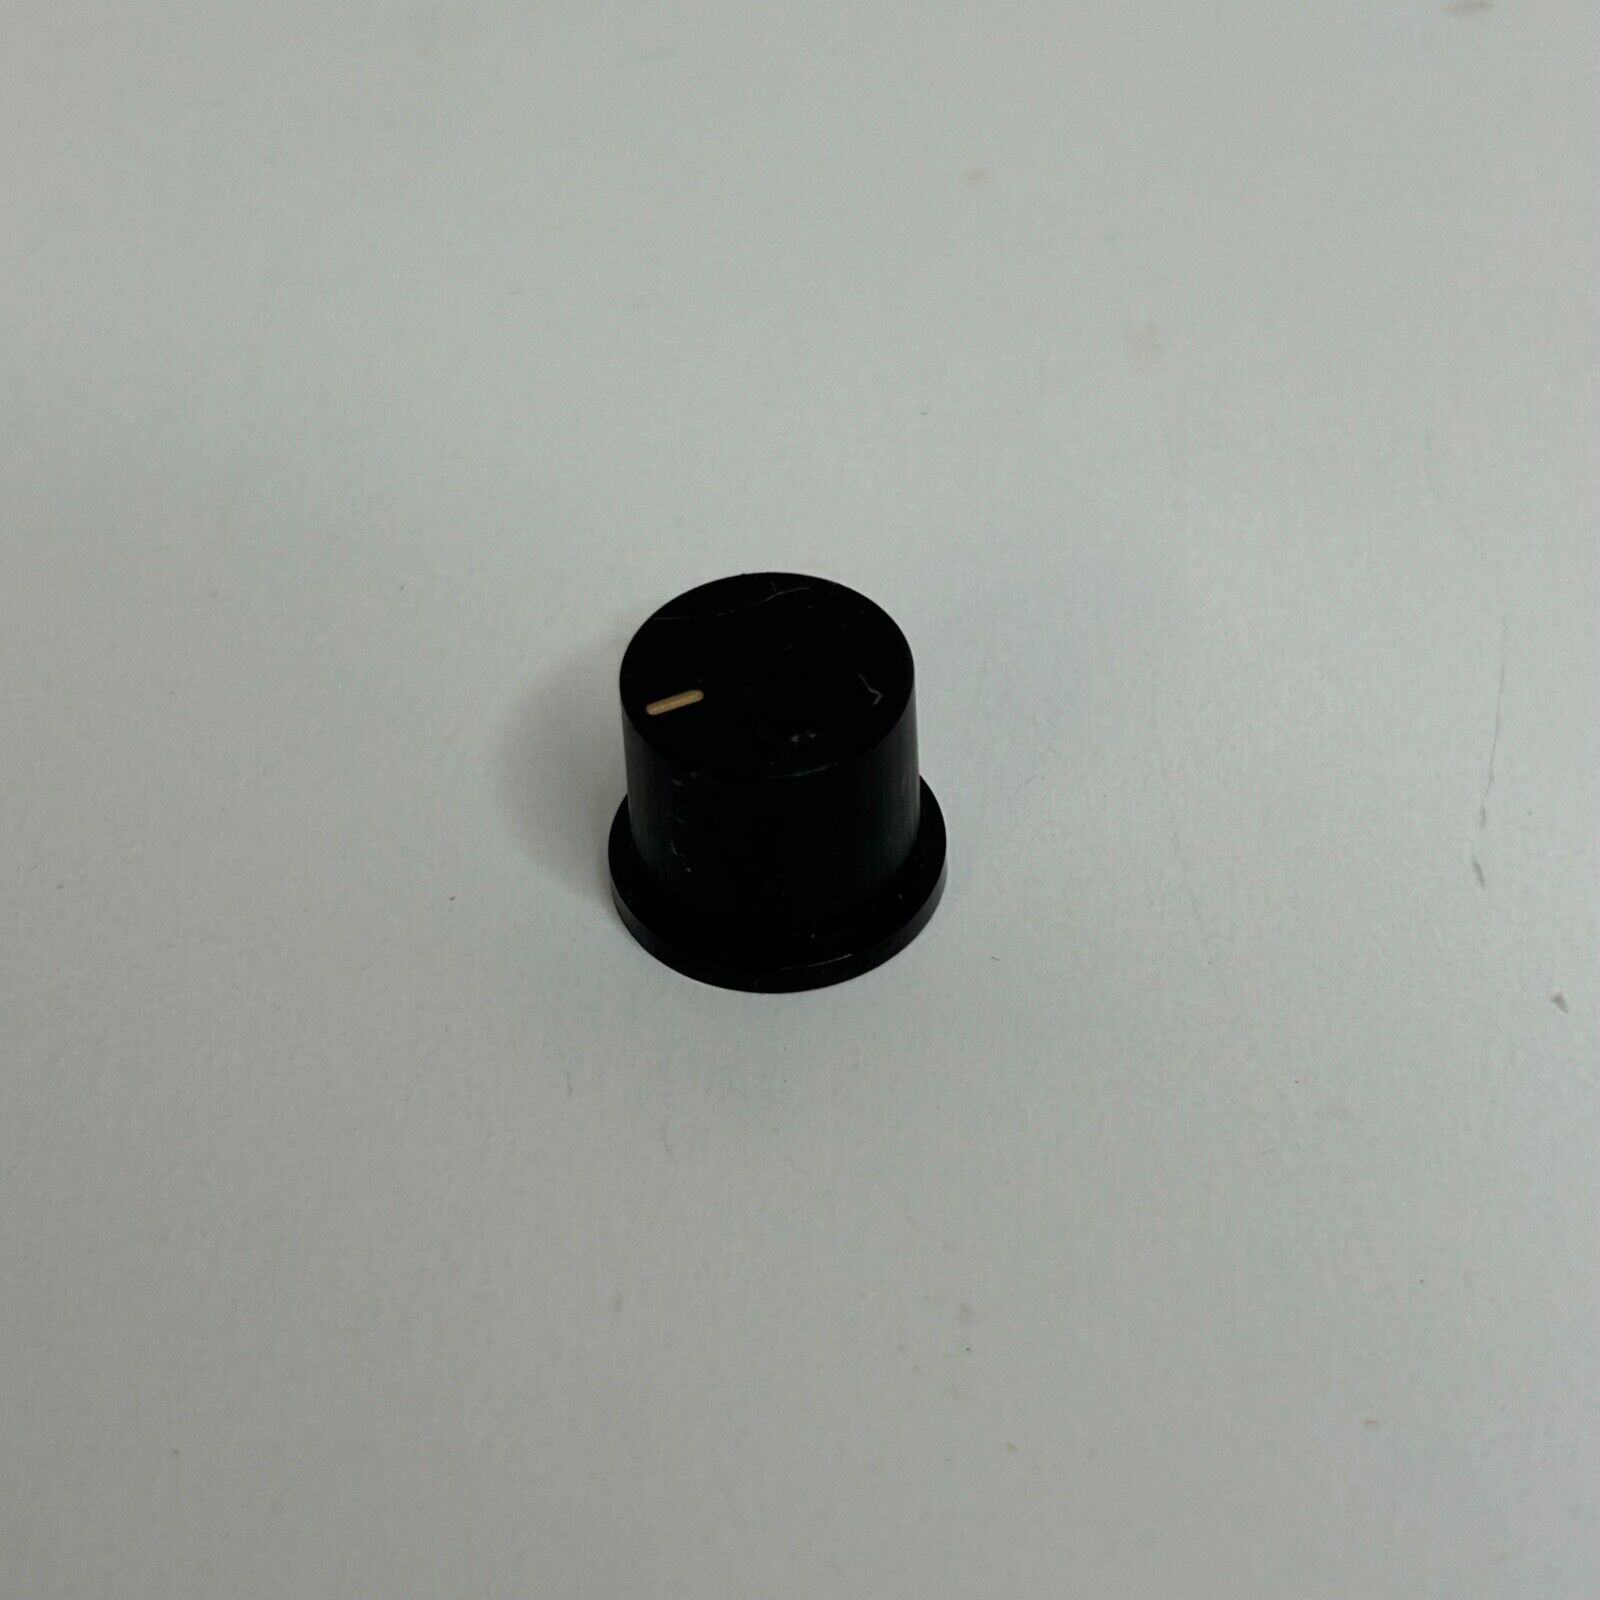 Vintage Pioneer SX-1300 Stereo Receiver Amplifier Balance Knob OEM Replacement